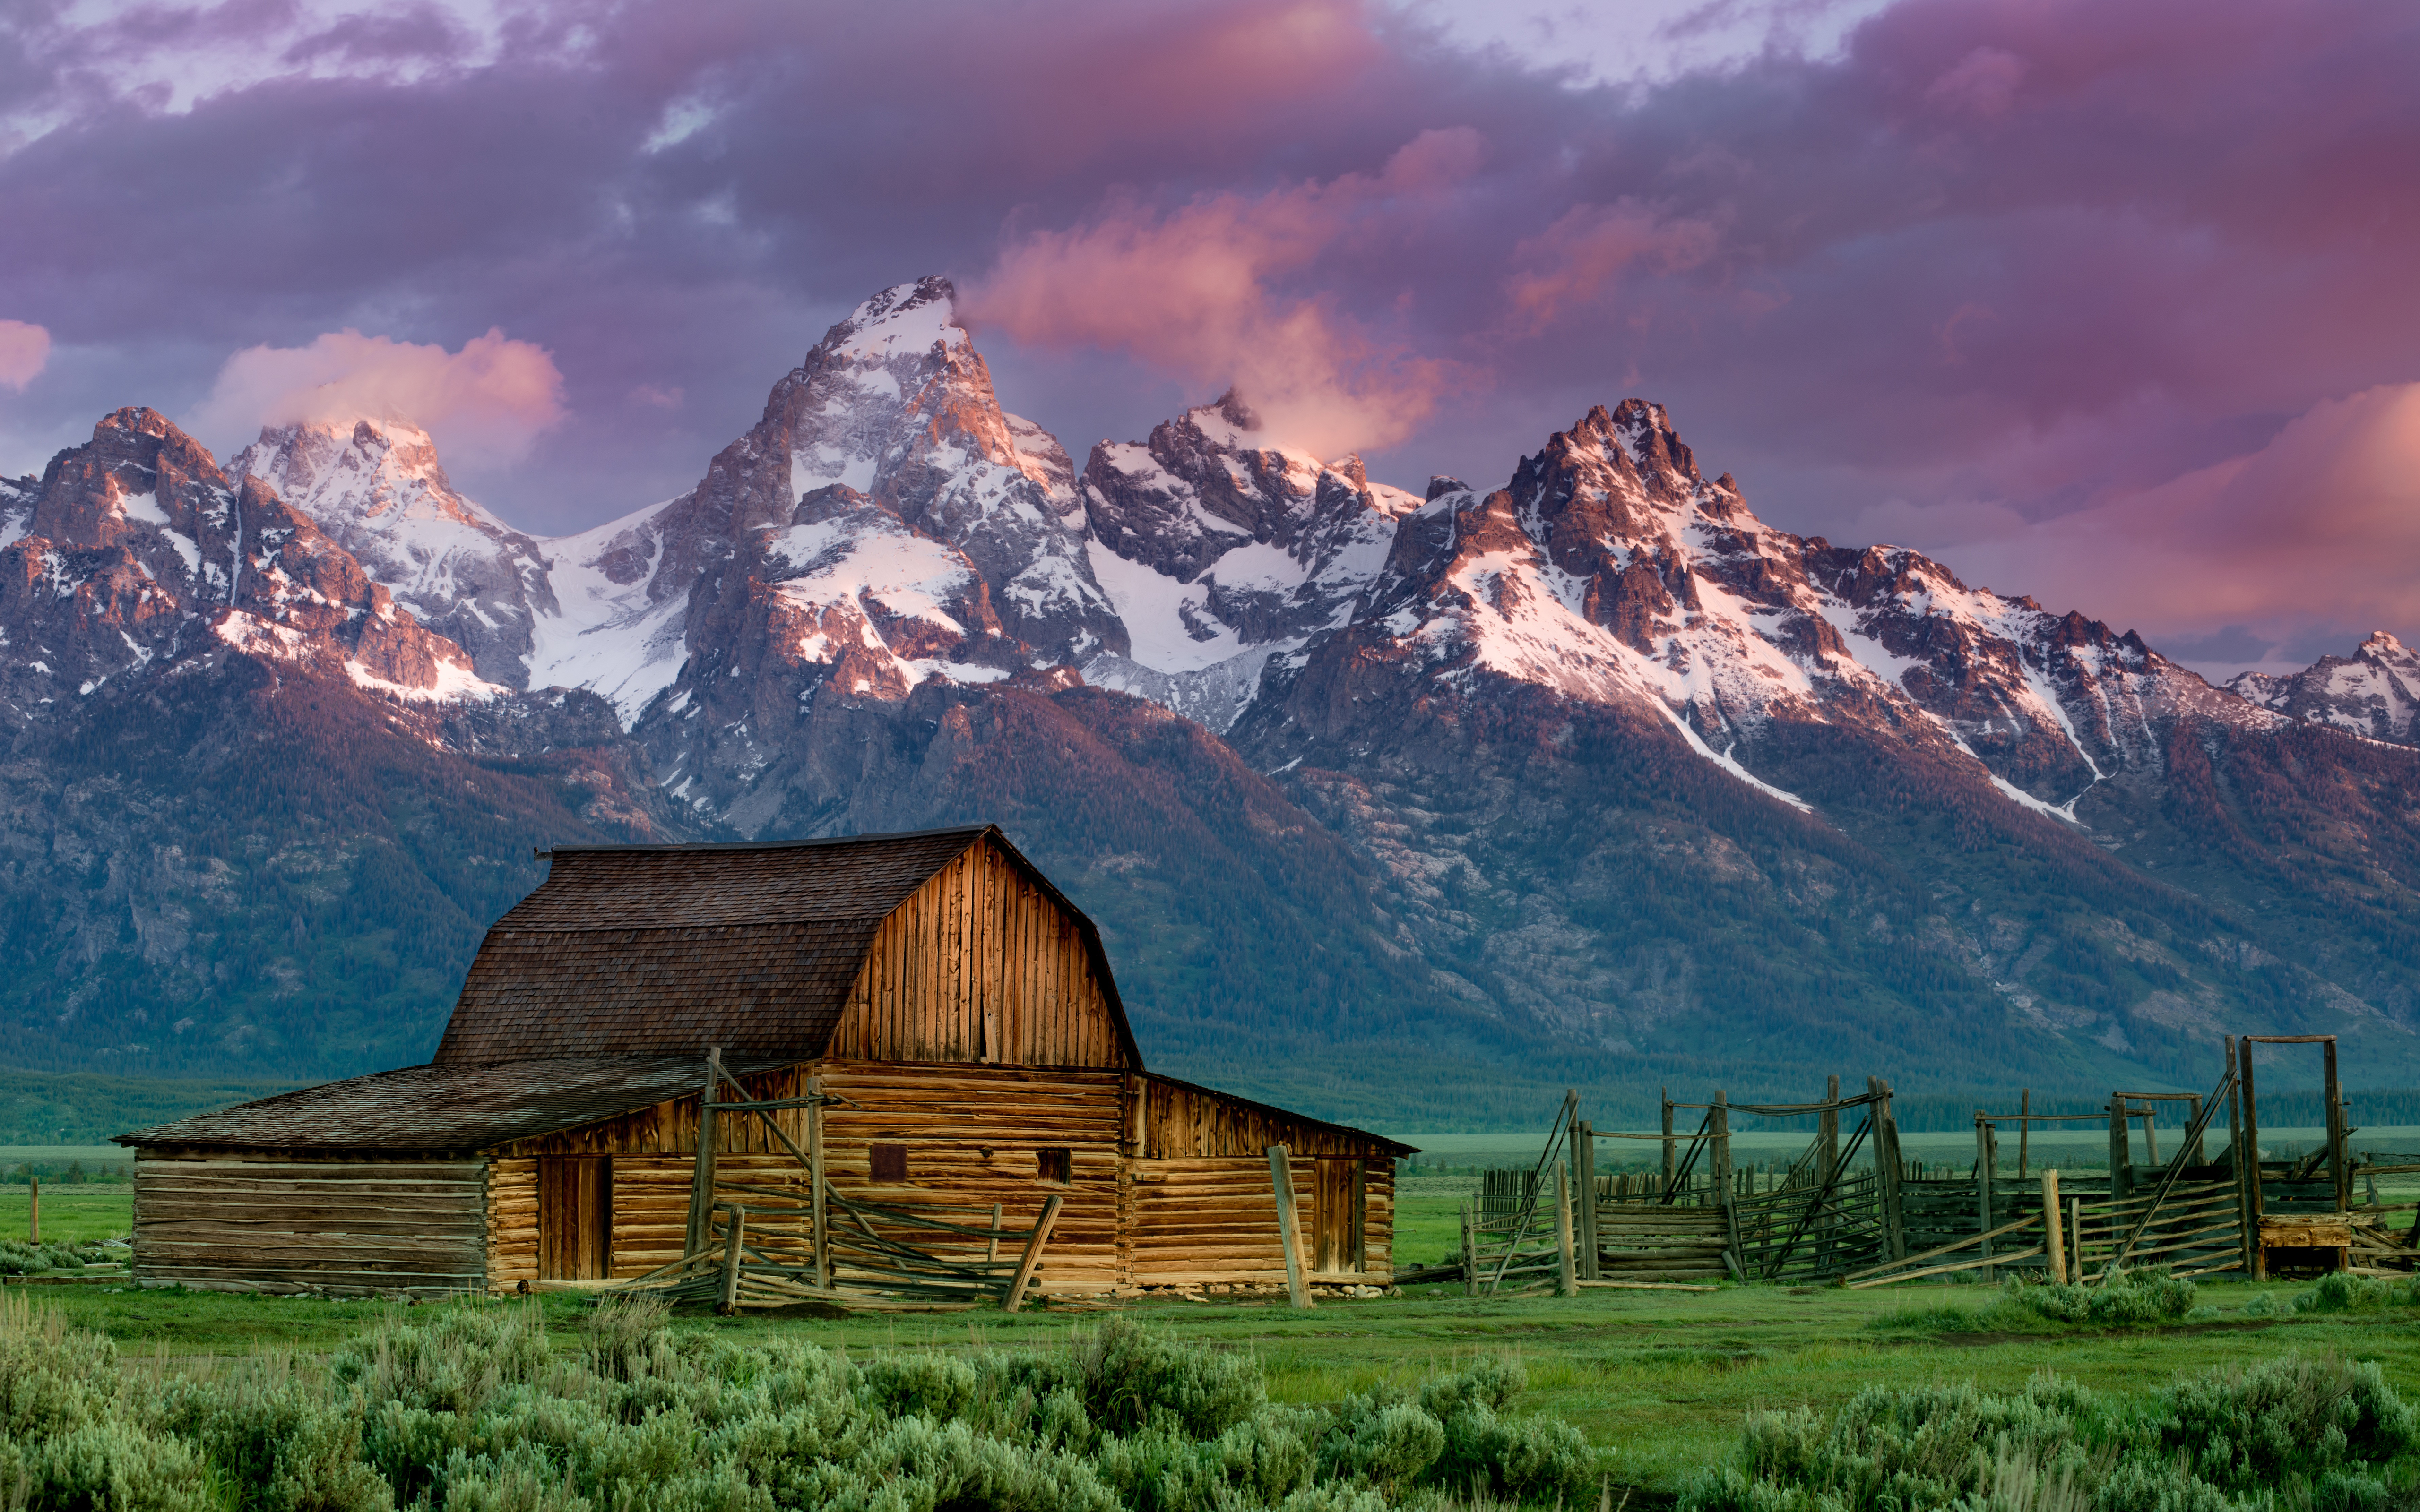 General 5120x3200 landscape mountains snowy peak barns clouds Rocky Mountains Grand Teton National Park Wyoming USA